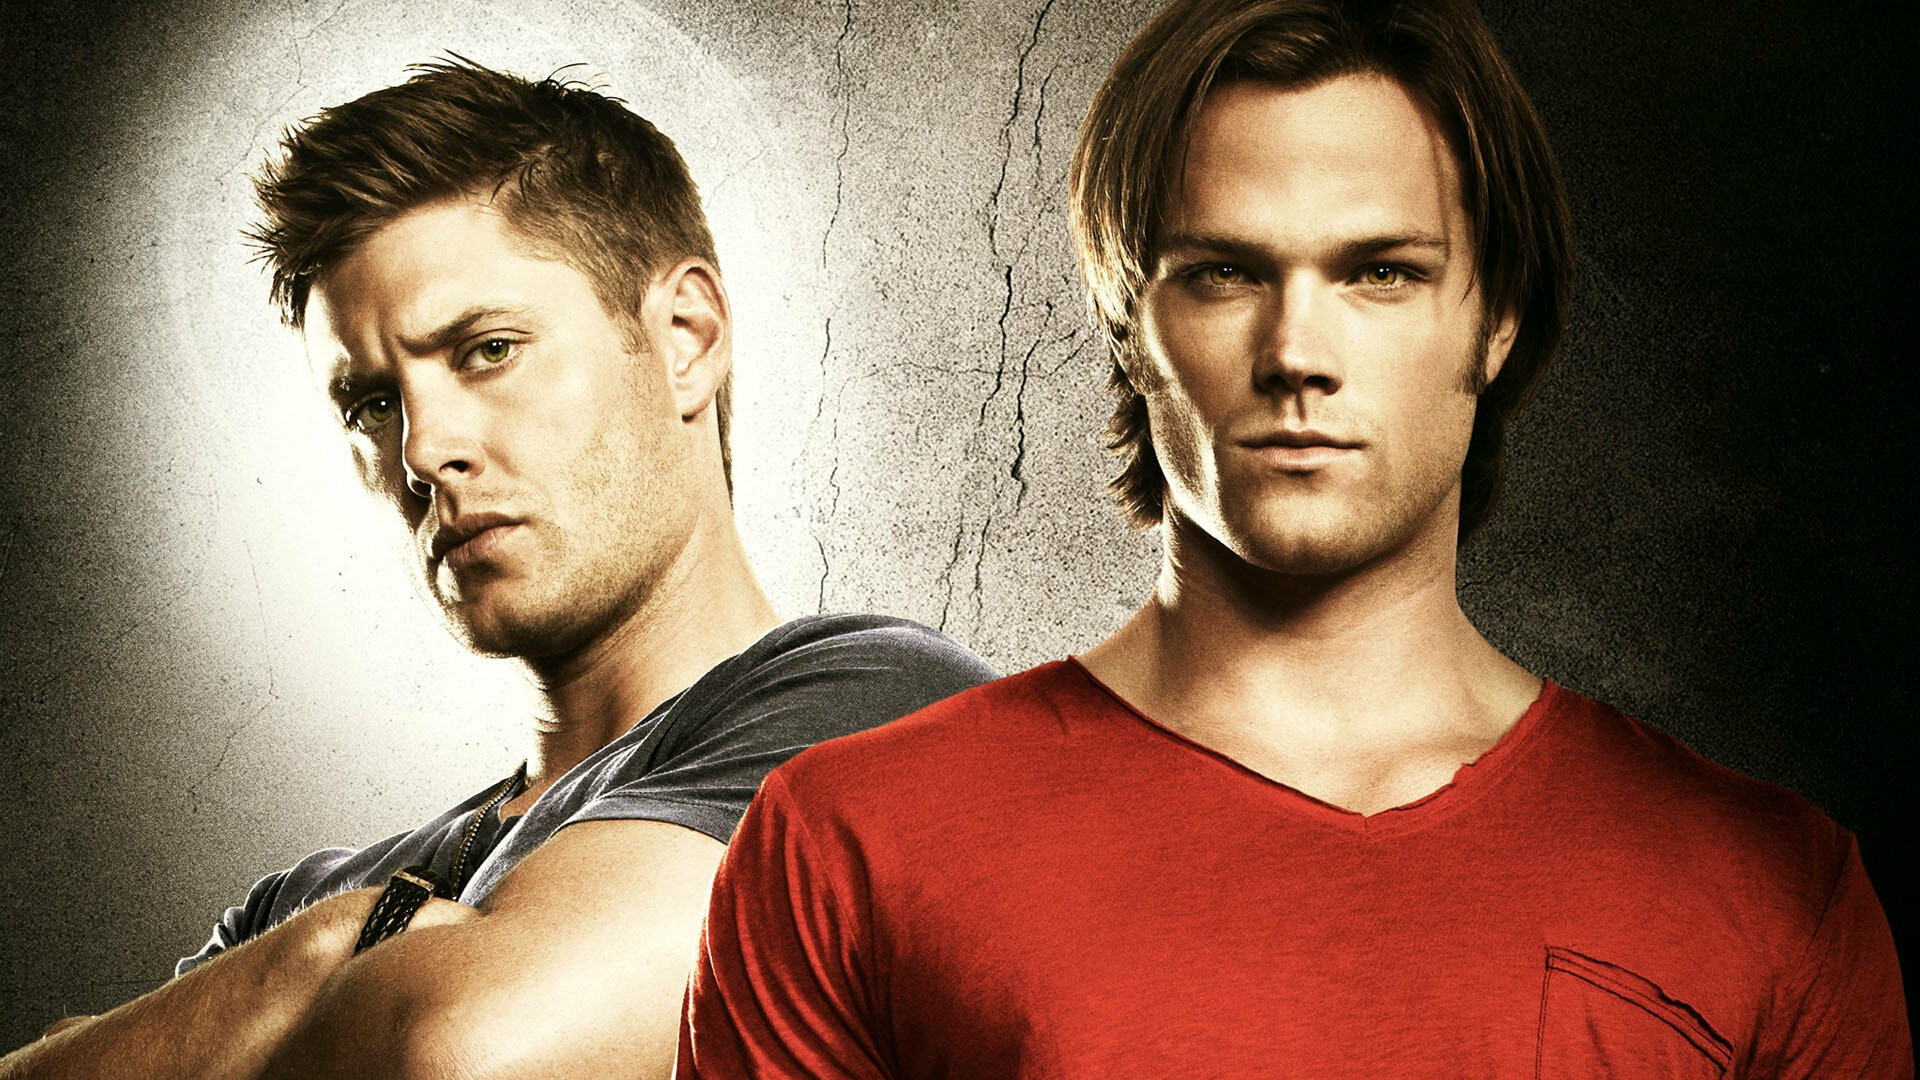 Supernatural: The thrilling and terrifying journey of the Winchester brothers, Dark fantasy drama. 1920x1080 Full HD Background.